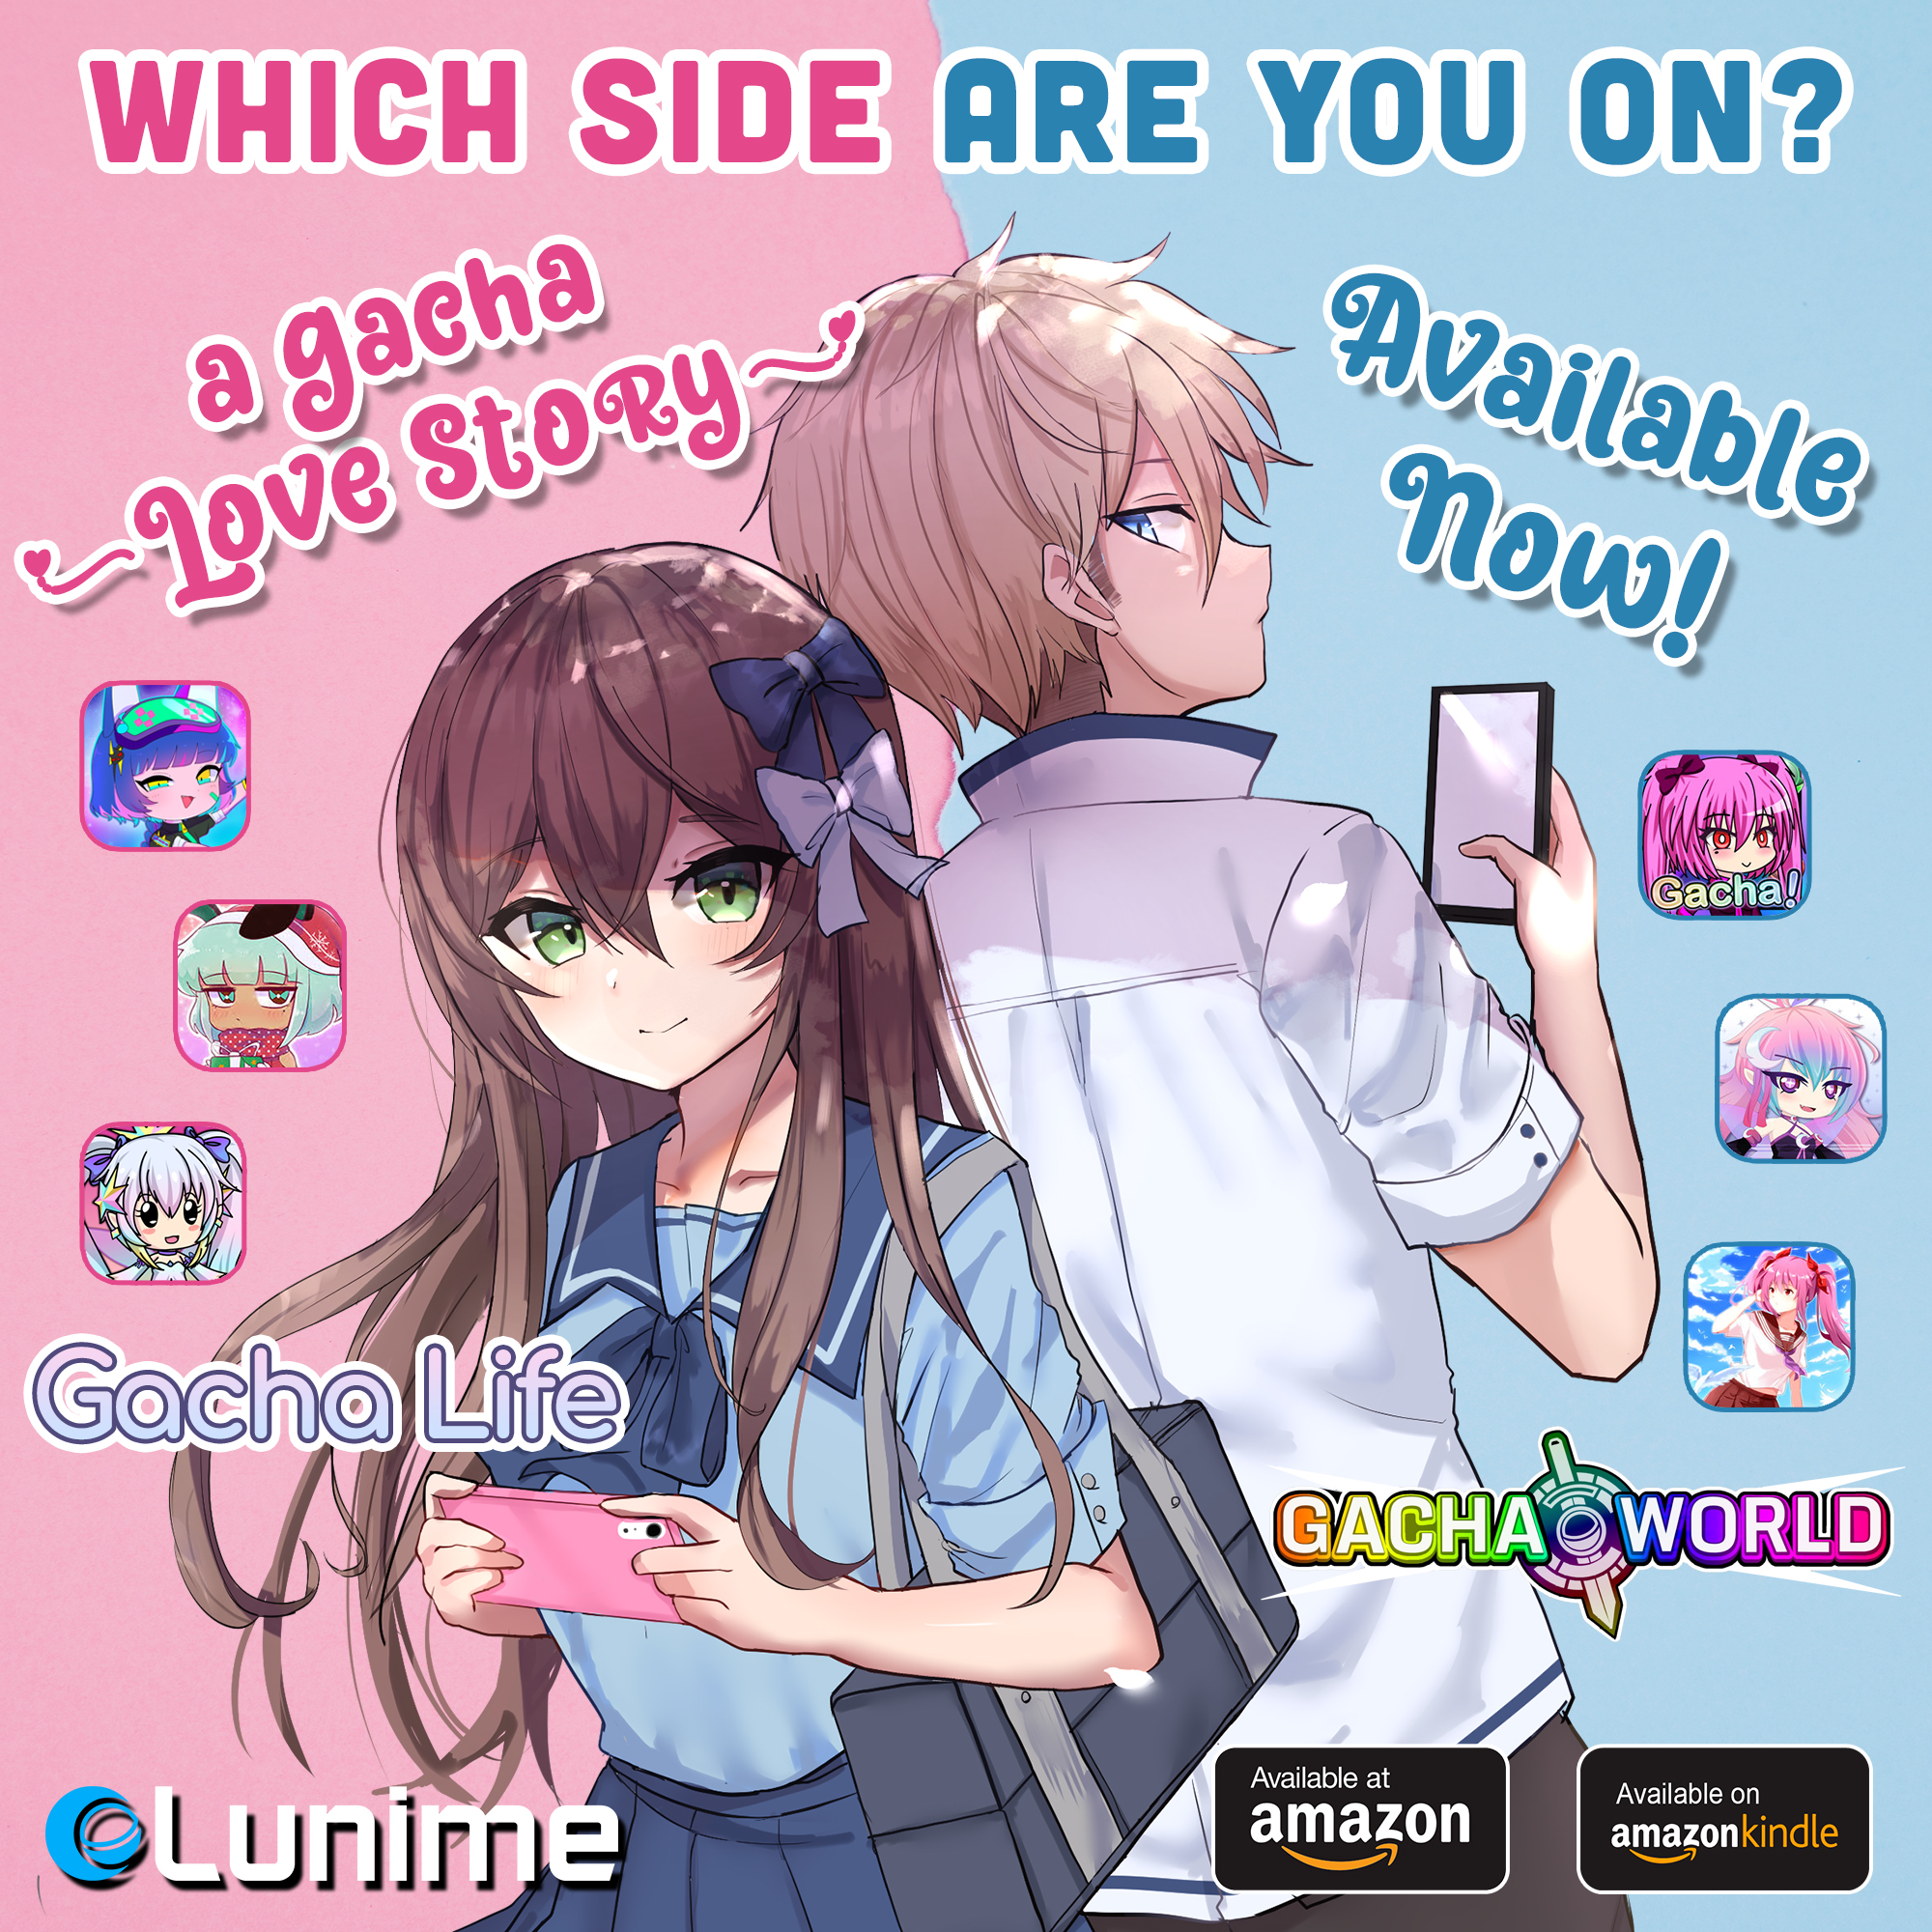 Lunime Which Side Are You On In Our New Light Novel 𝘈 𝘎𝘢𝘤𝘩𝘢 𝘓𝘰𝘷𝘦 𝘚𝘵𝘰𝘳𝘺 The Two Main Characters Disagree About Which Lunime Games Are Better Gacha Life Gacha Club